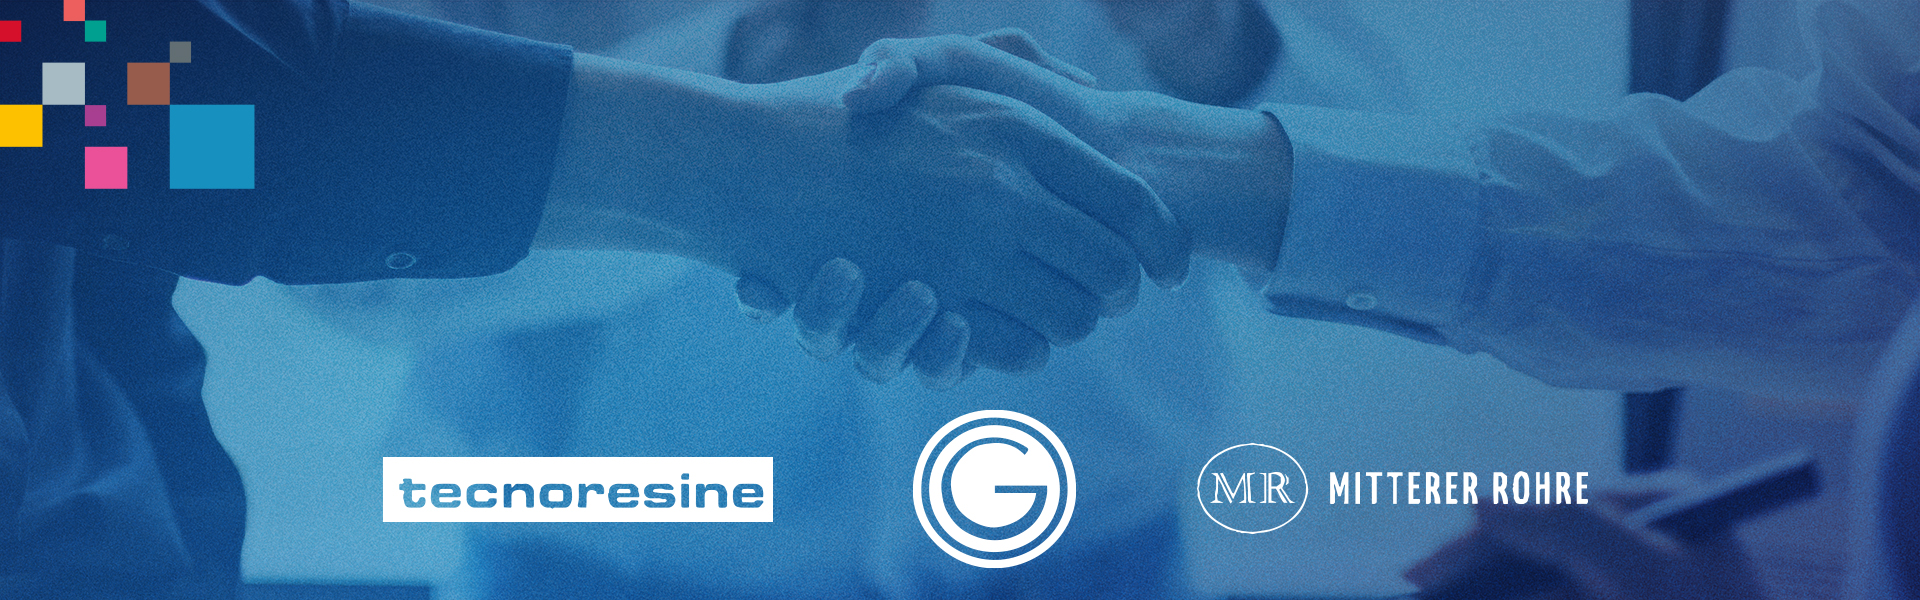 Three new members join the Consorzio Stabile Grifone